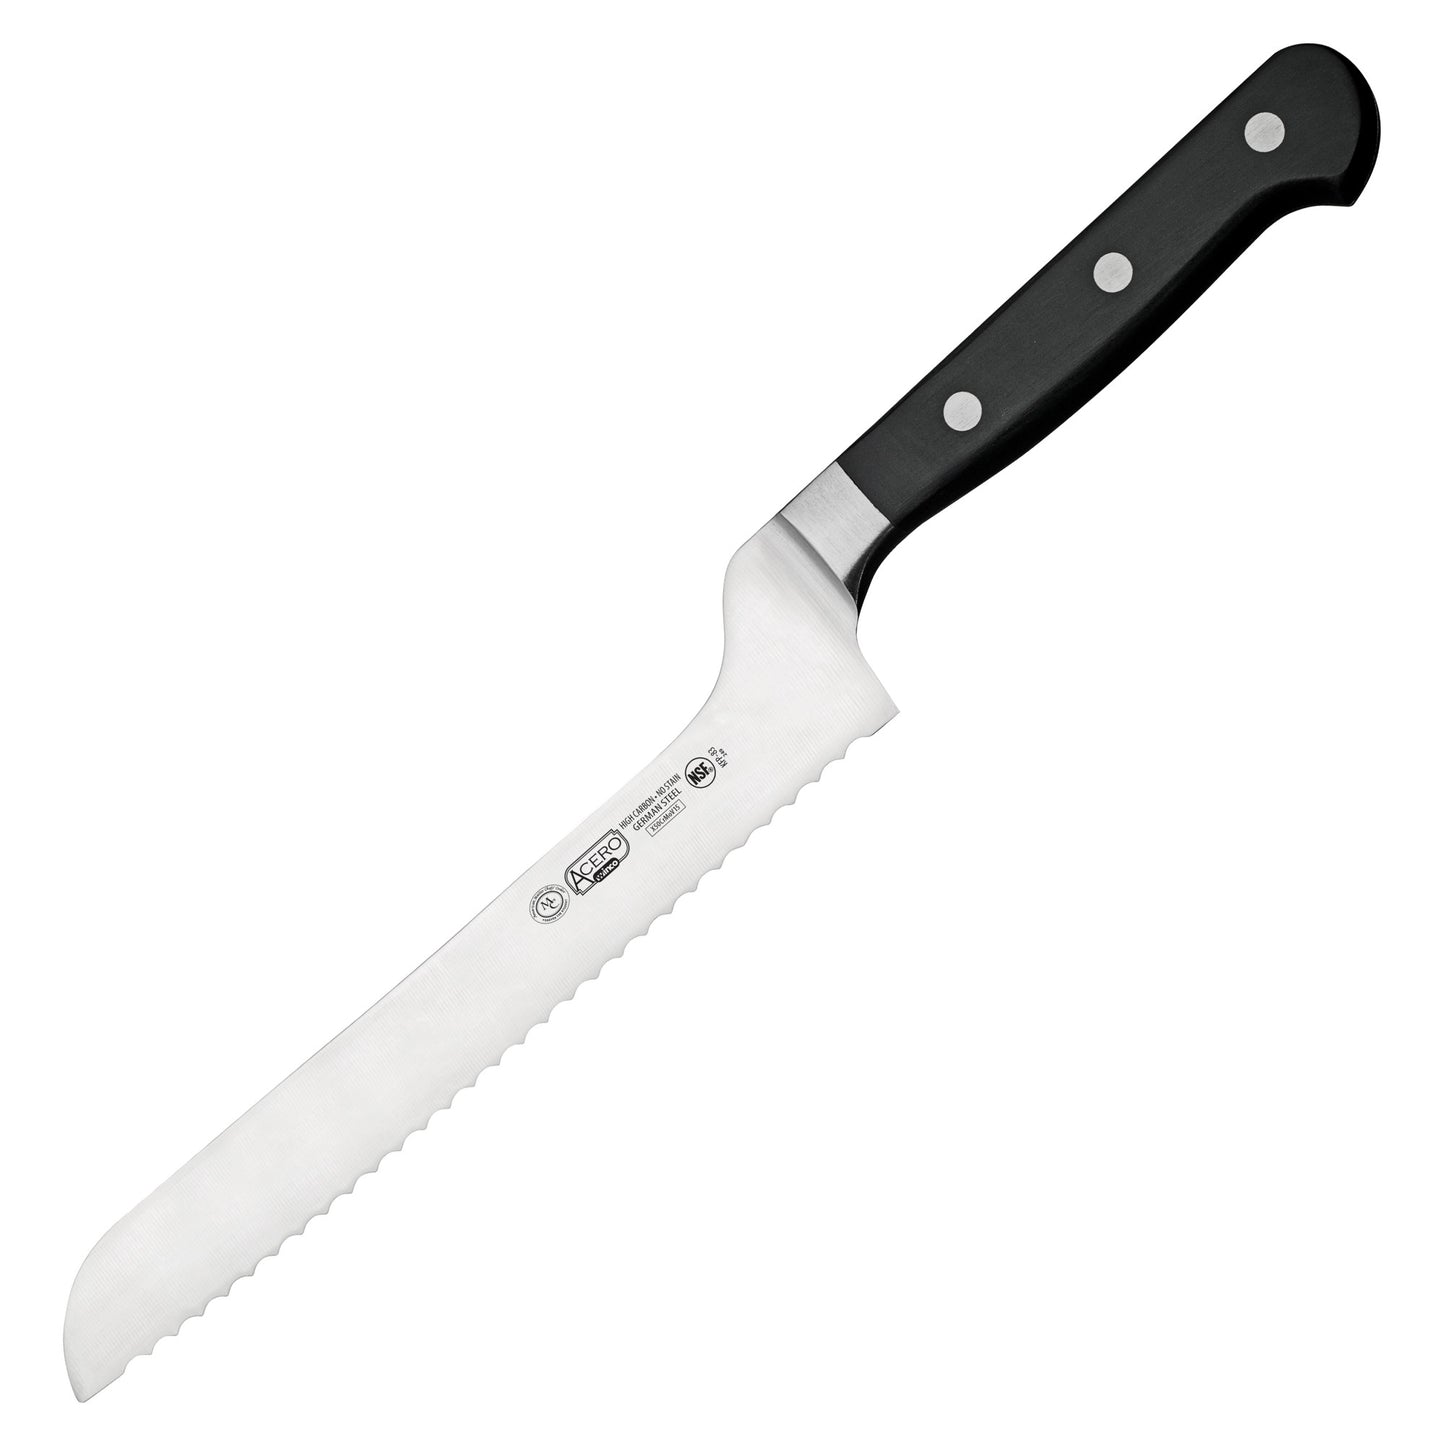 KFP-83 - Acero 8" Bread Knife, Offset